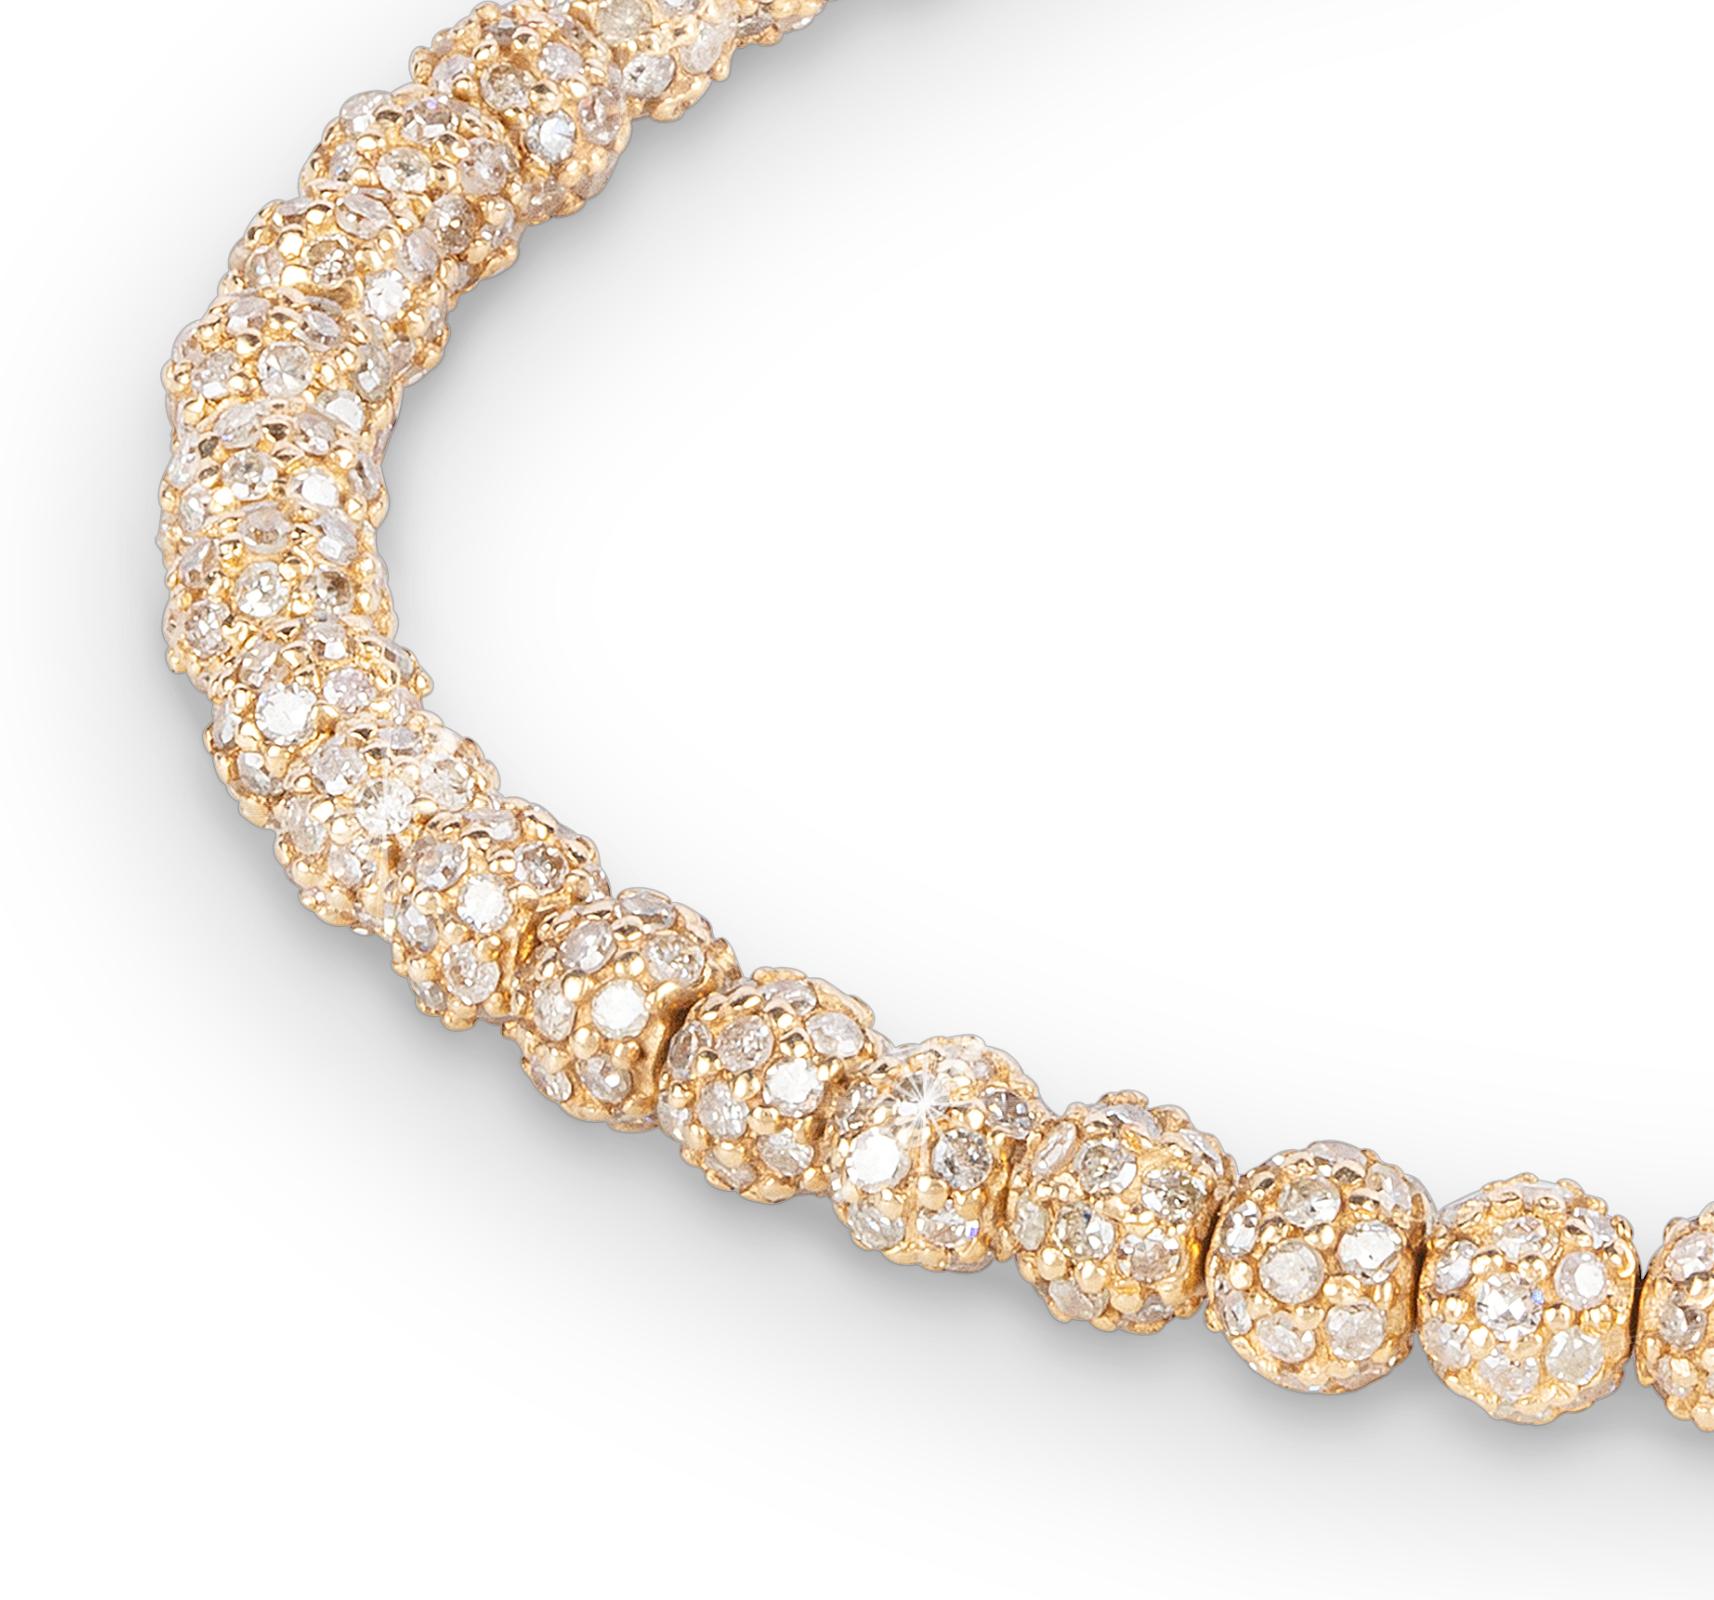 A new take on a classic tennis bracelet. THEVAULT15's handmade 18-karat gold bracelet is encrusted with sparkling free turning diamond beads and a double-sided diamond clasp. Each bead is created with the highest accuracy by our artisans for